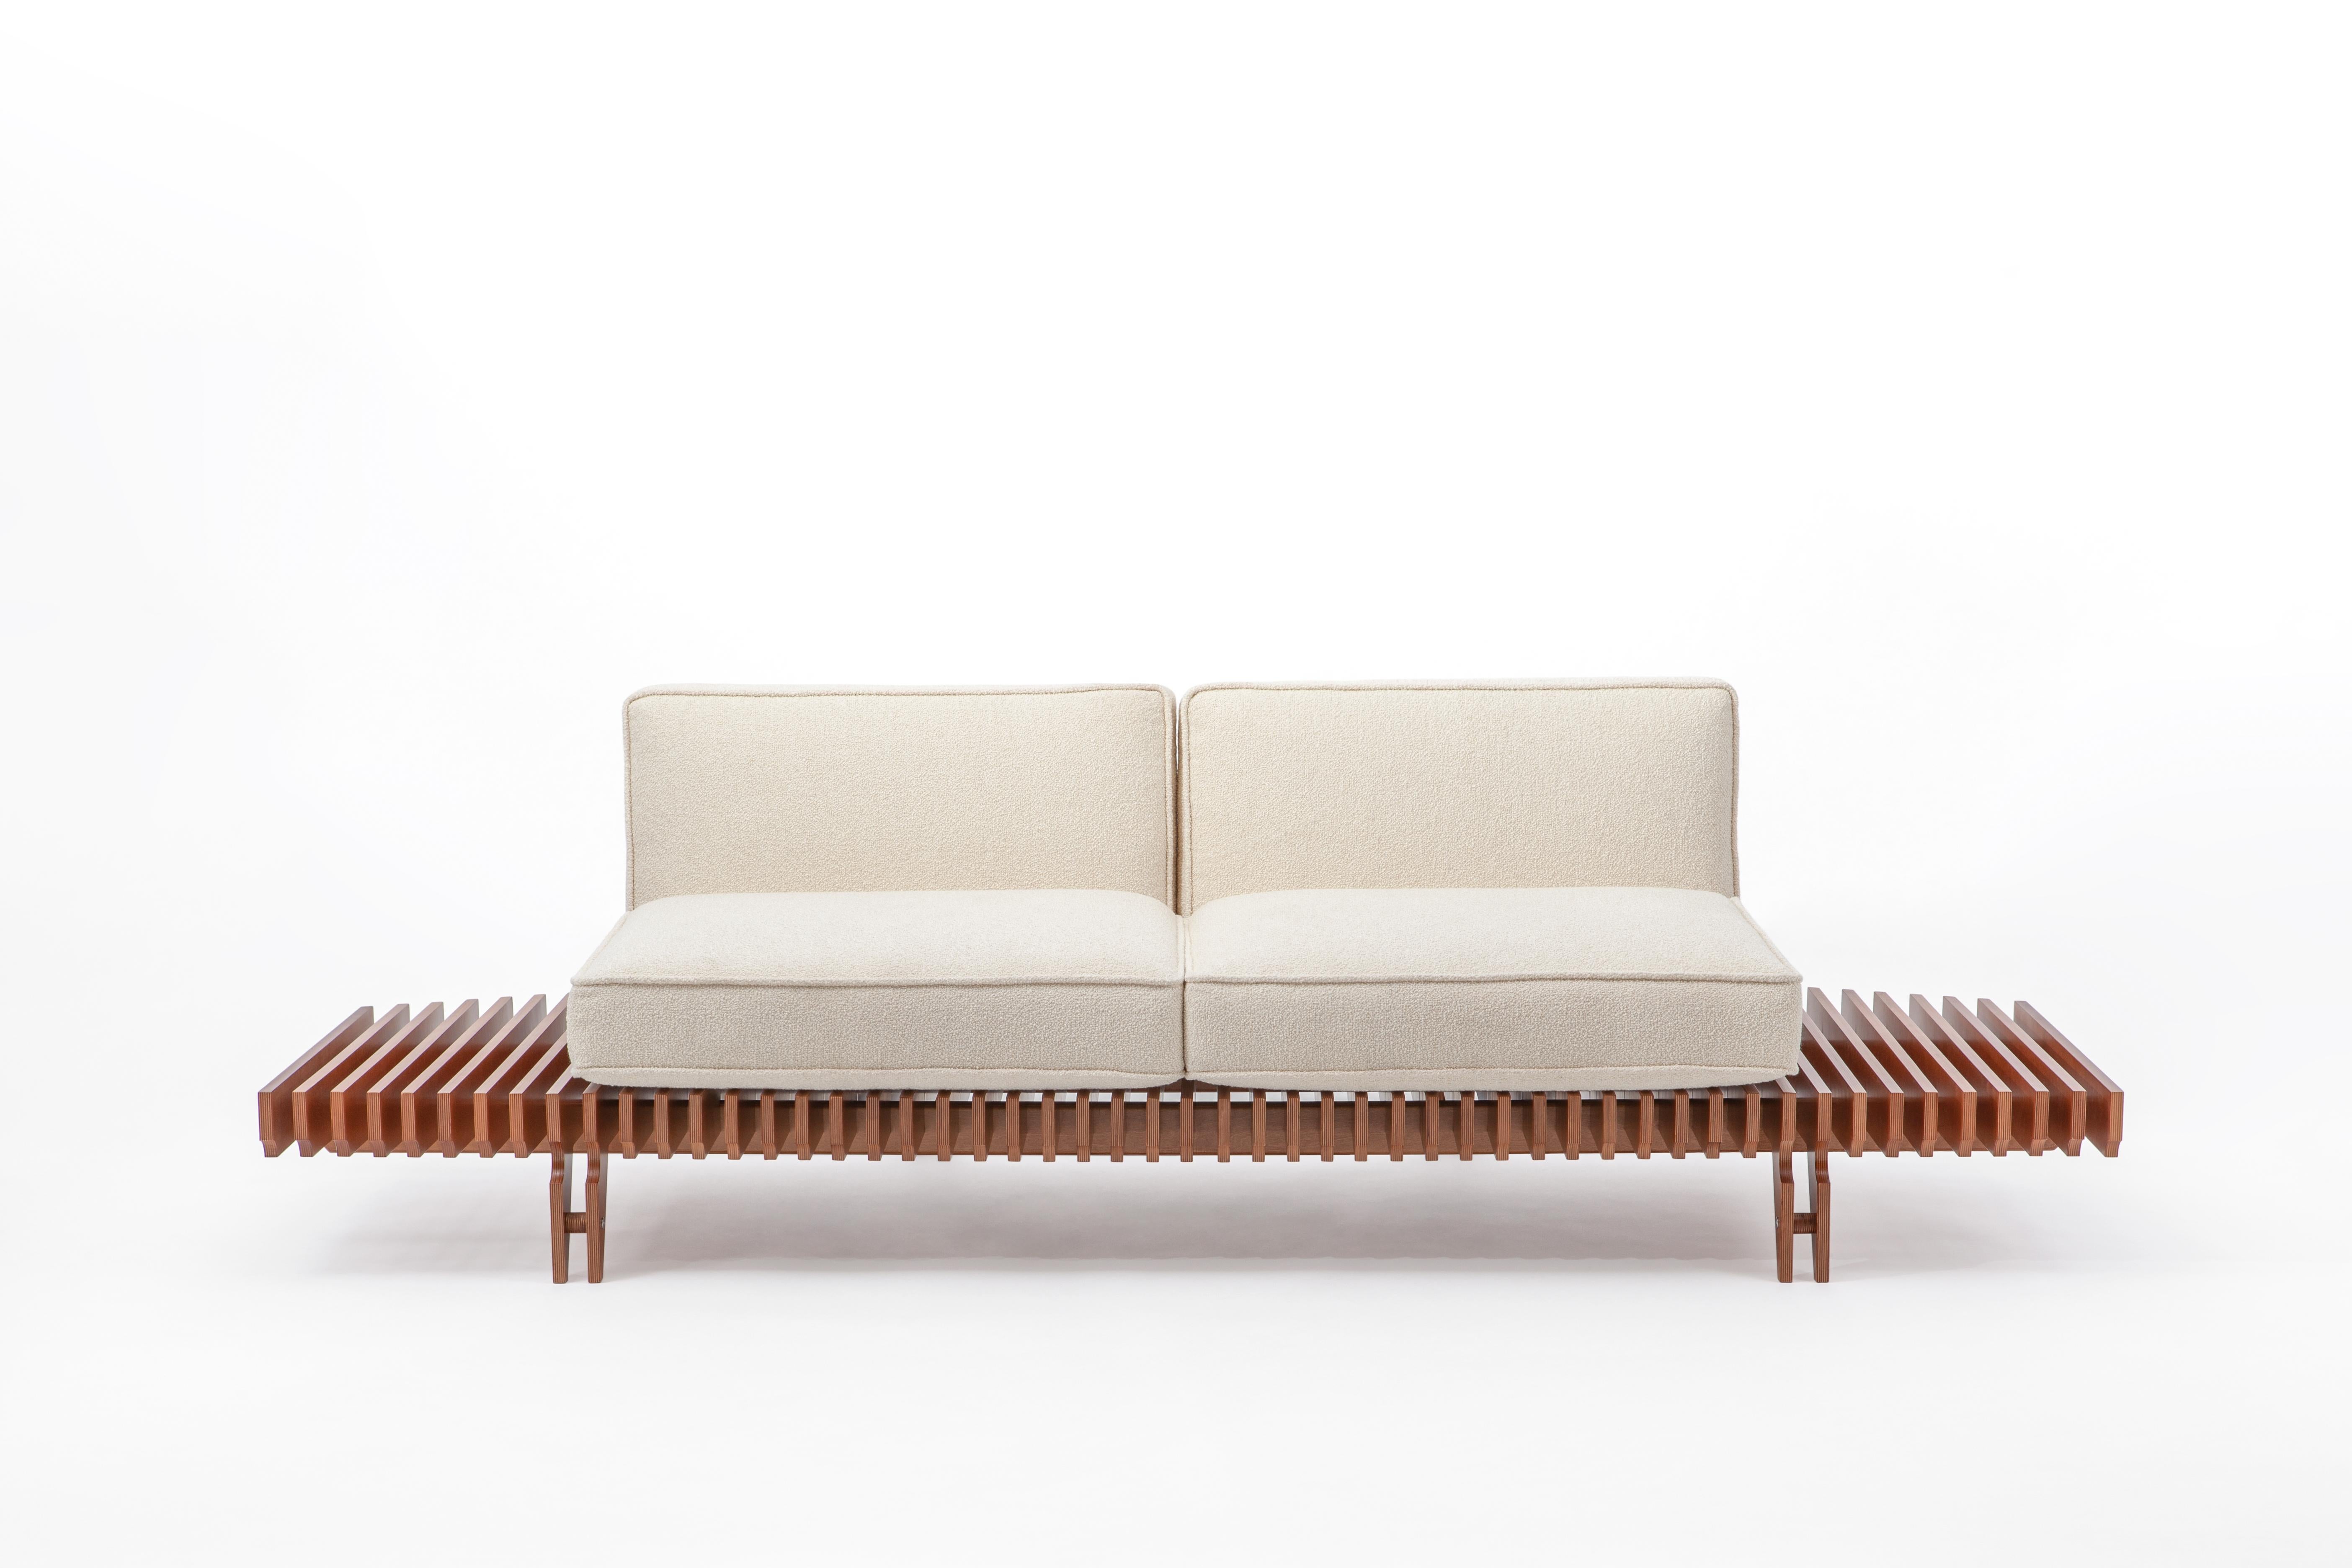 Contemporary Sofa Muir Paesaggio collection designed by Hannes Peer for SEM. 
The idea for the 'MUIR' sofa was born during a trip by Hannes Peer to the Northern California coast, specifically during a stay in a typical modernist house overlooking